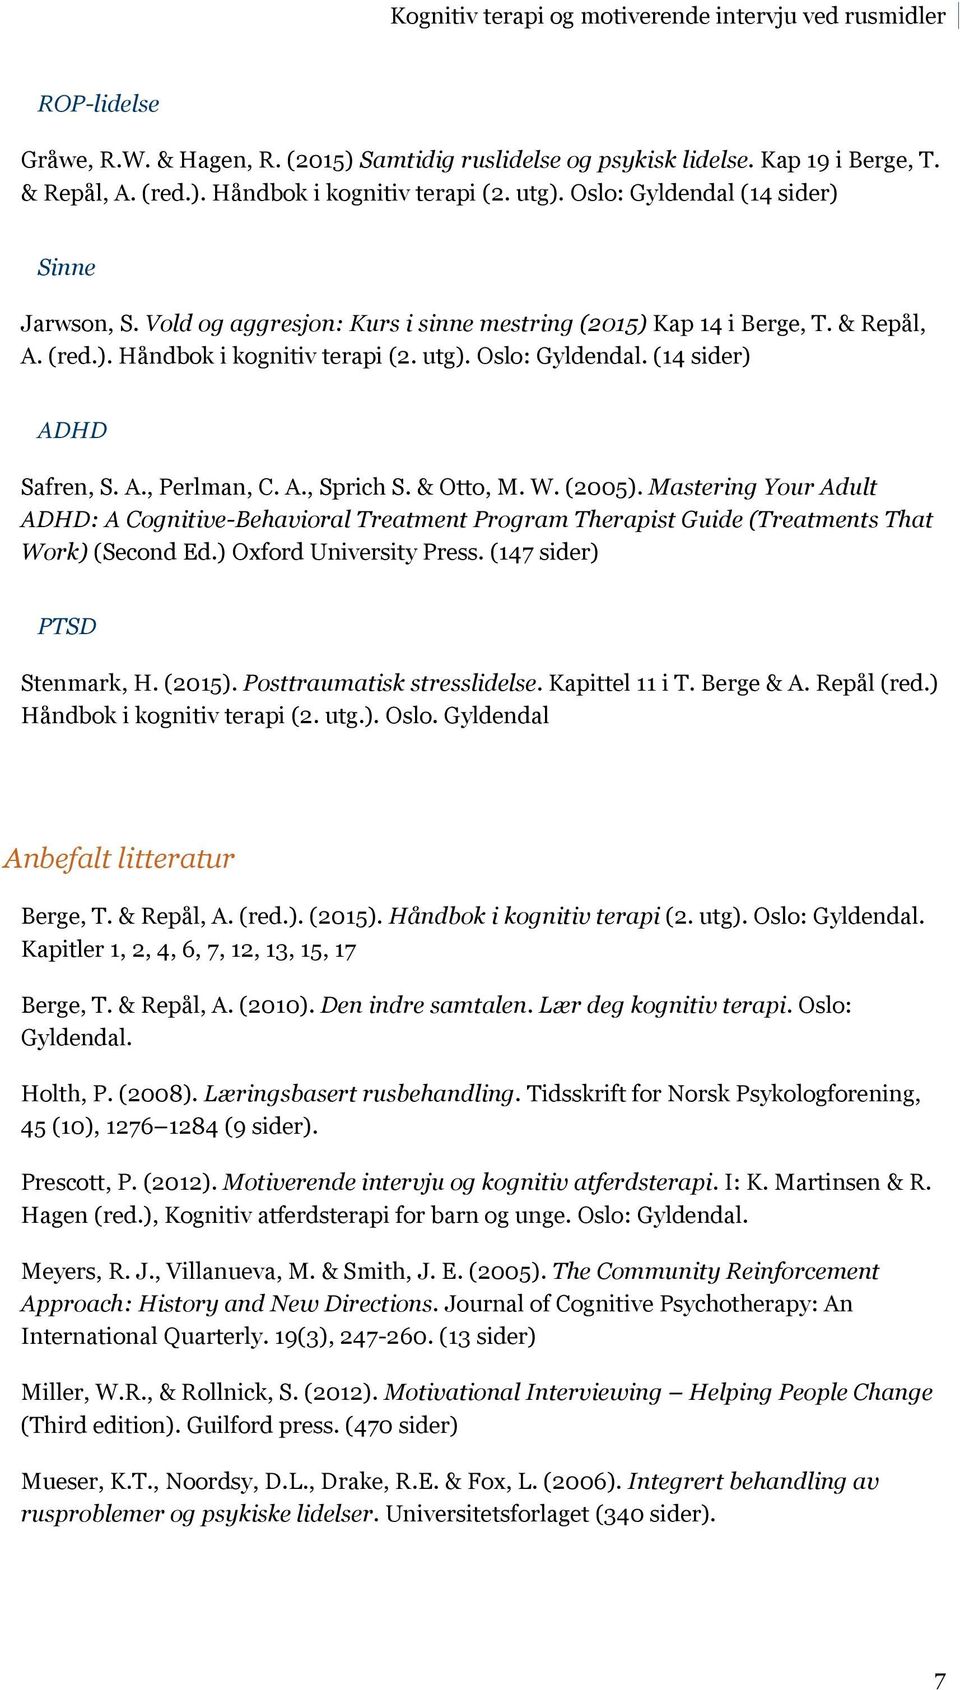 (14 sider) ADHD Safren, S. A., Perlman, C. A., Sprich S. & Otto, M. W. (2005). Mastering Your Adult ADHD: A Cognitive-Behavioral Treatment Program Therapist Guide (Treatments That Work) (Second Ed.